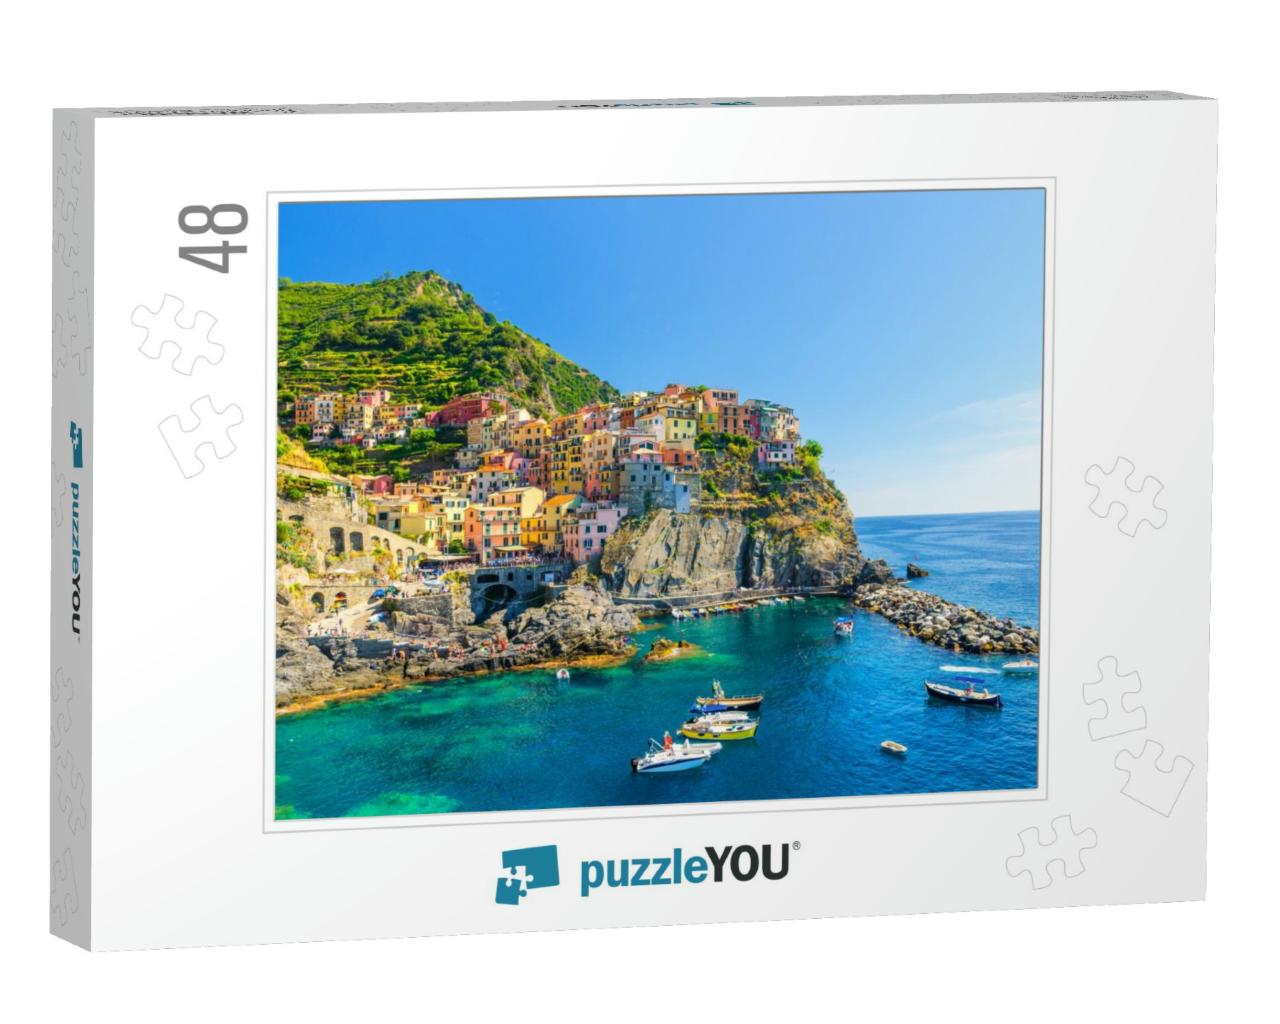 Manarola Traditional Typical Italian Village in National... Jigsaw Puzzle with 48 pieces